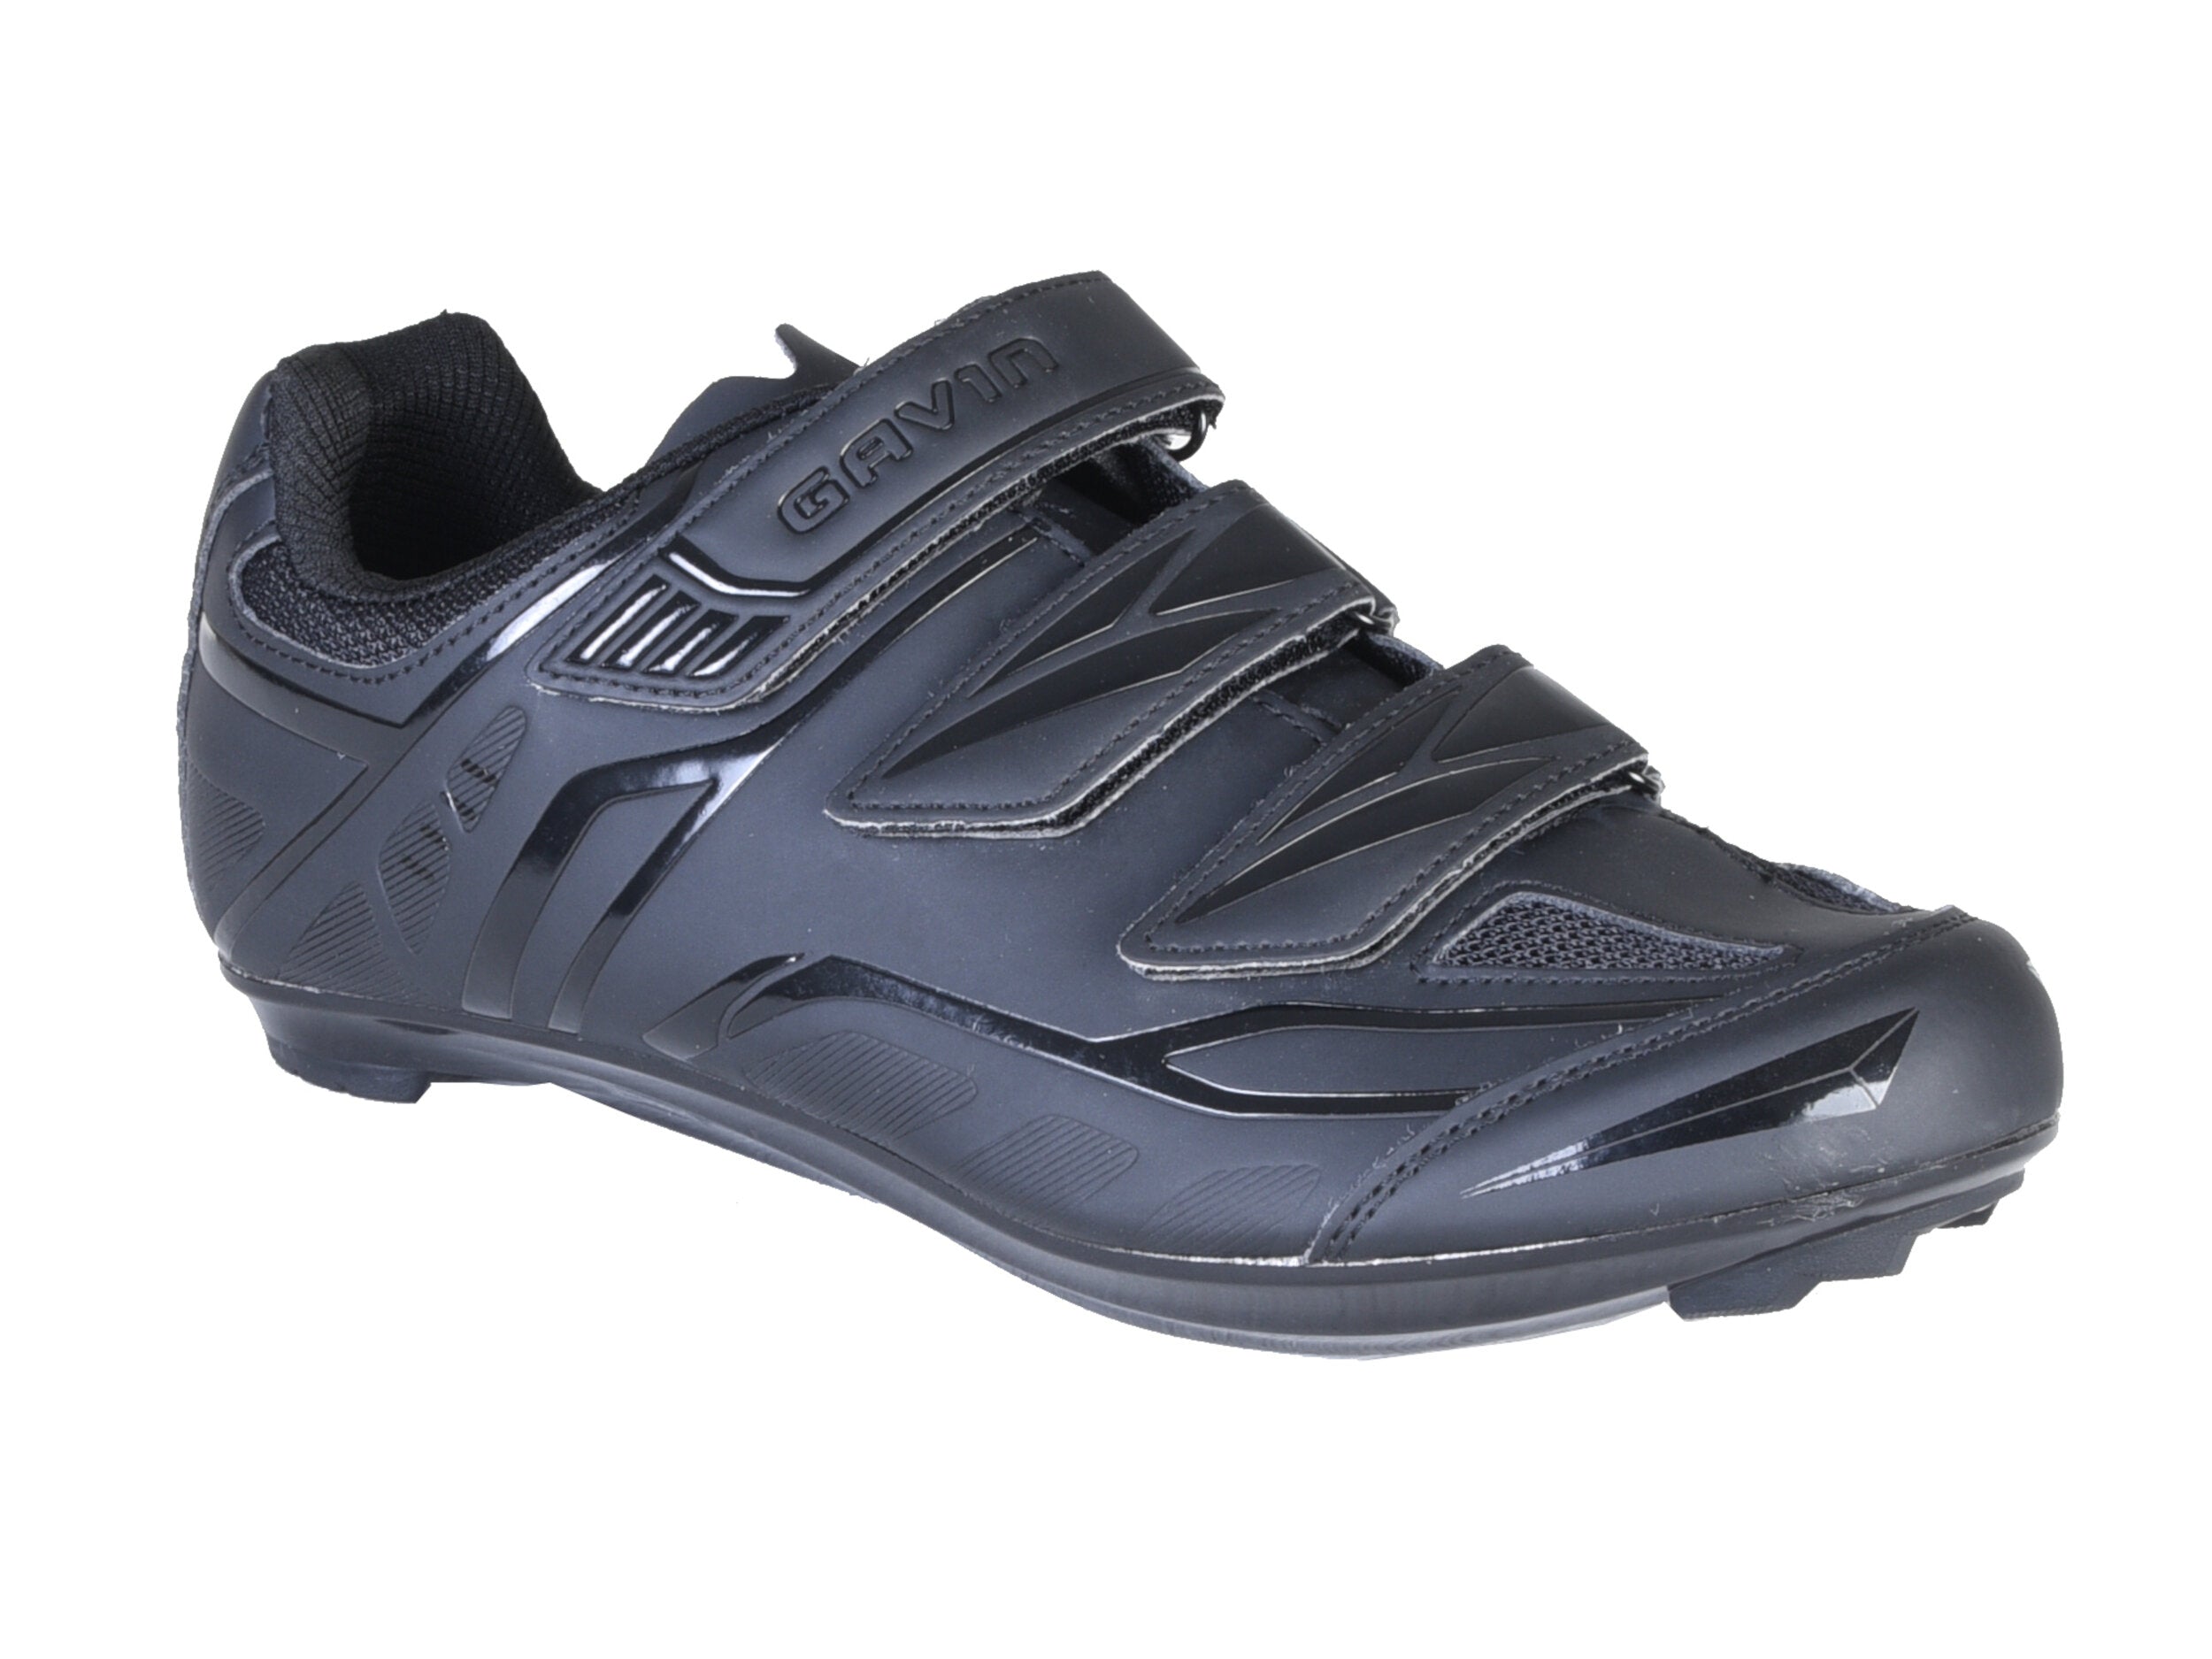 women's cycling shoes spd compatible